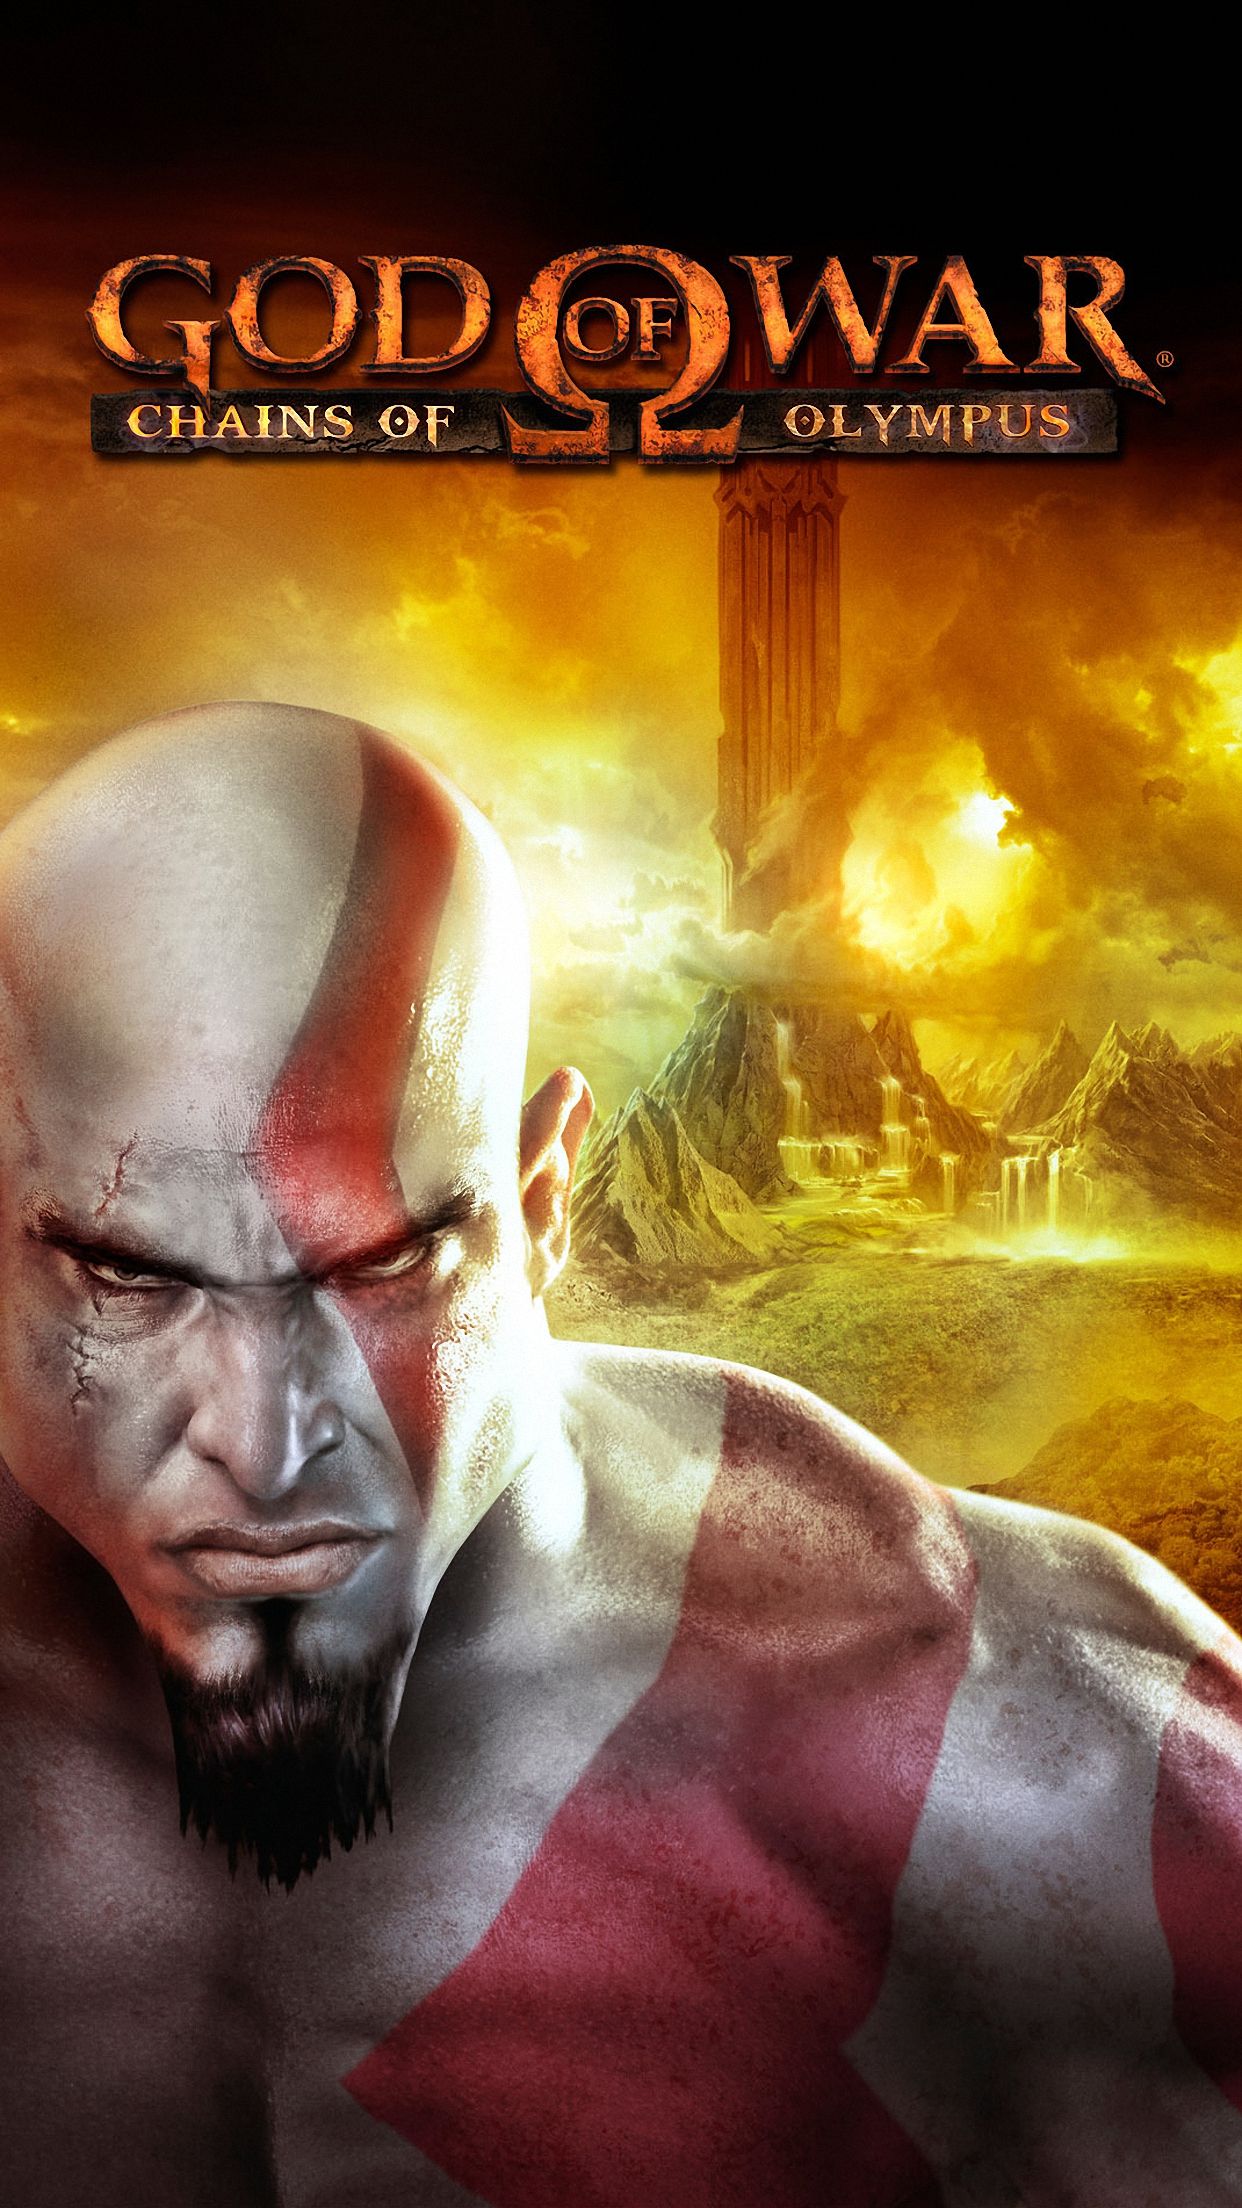 God Of War Chains Of Olympus Wallpaper for iPhone Pro Max, X, 6